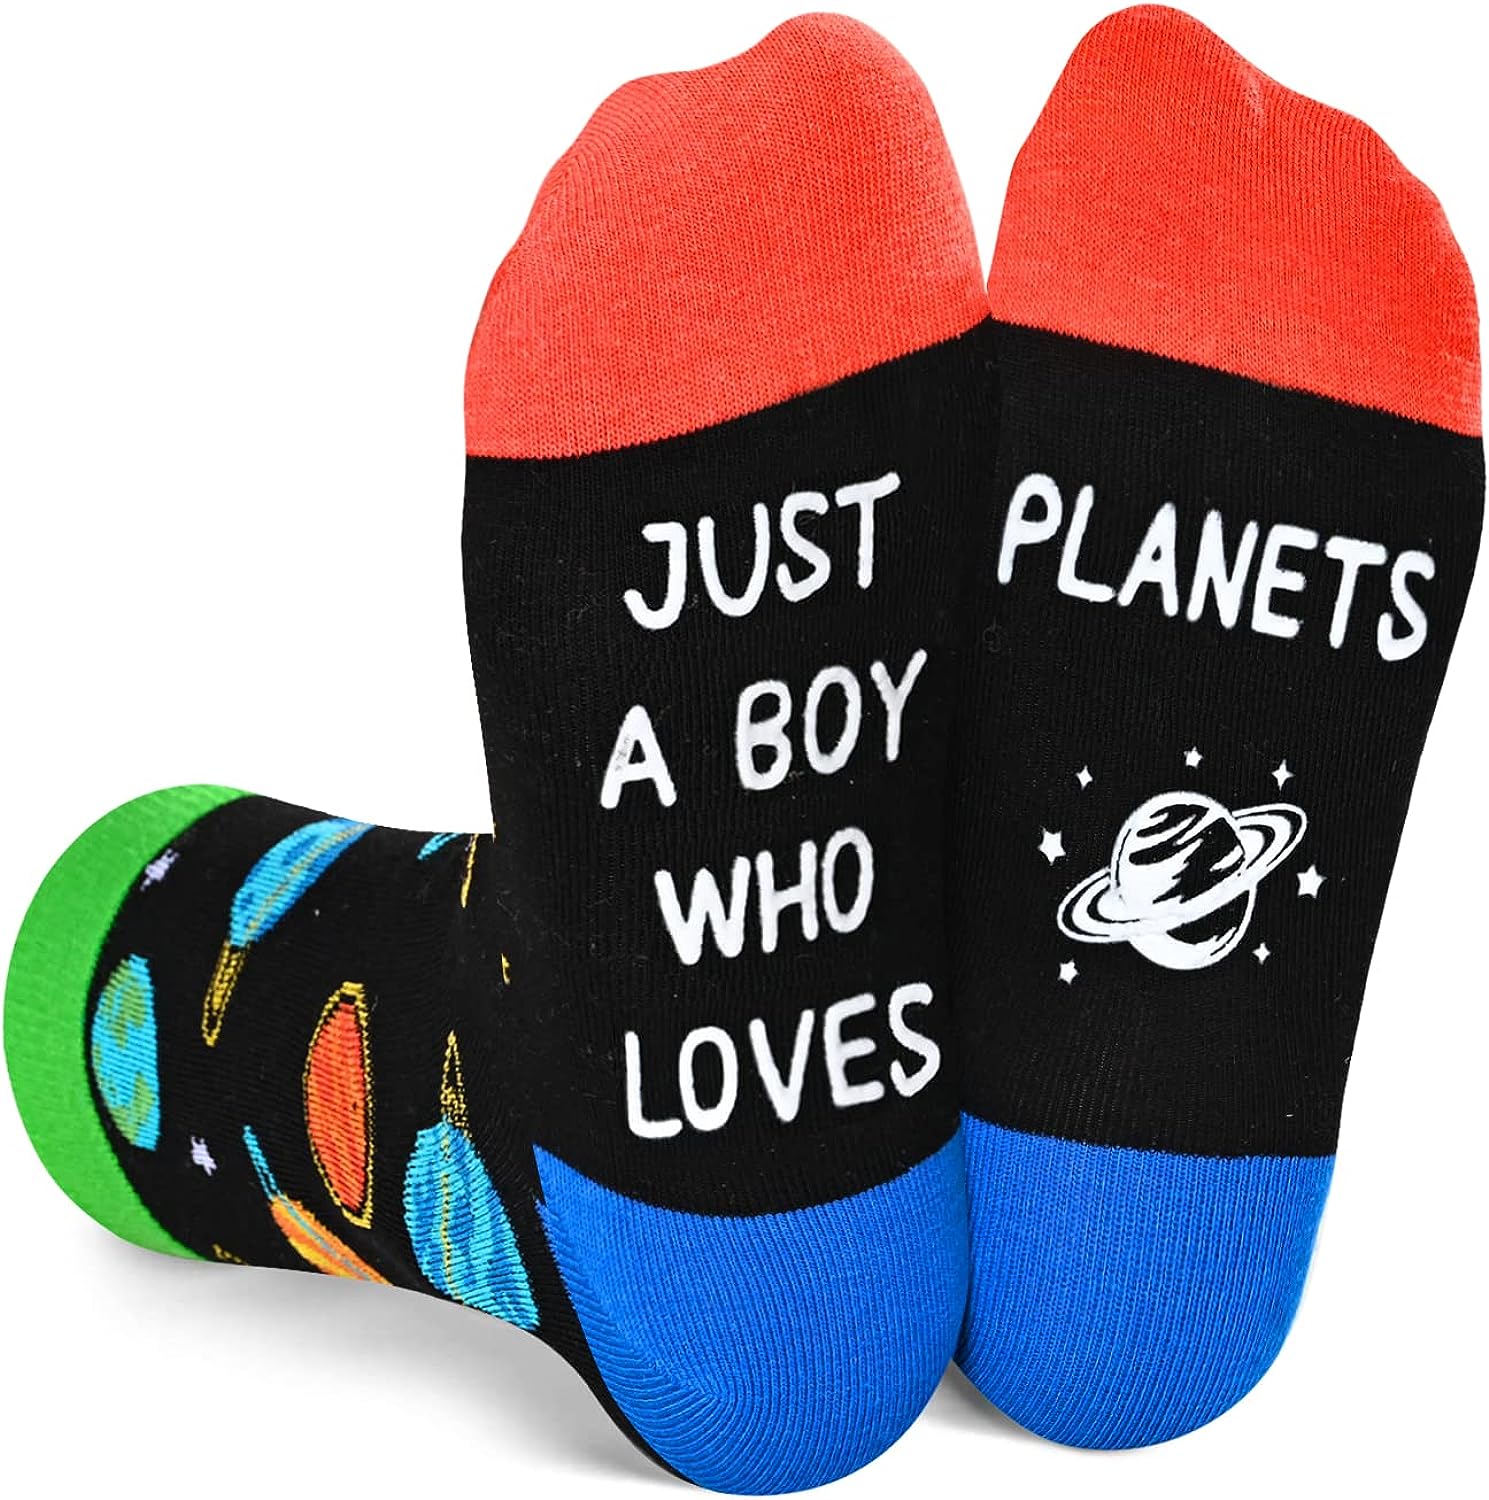 HAPPYPOP Crazy Silly Funny Novelty Socks for Kids, Gifts for Boys